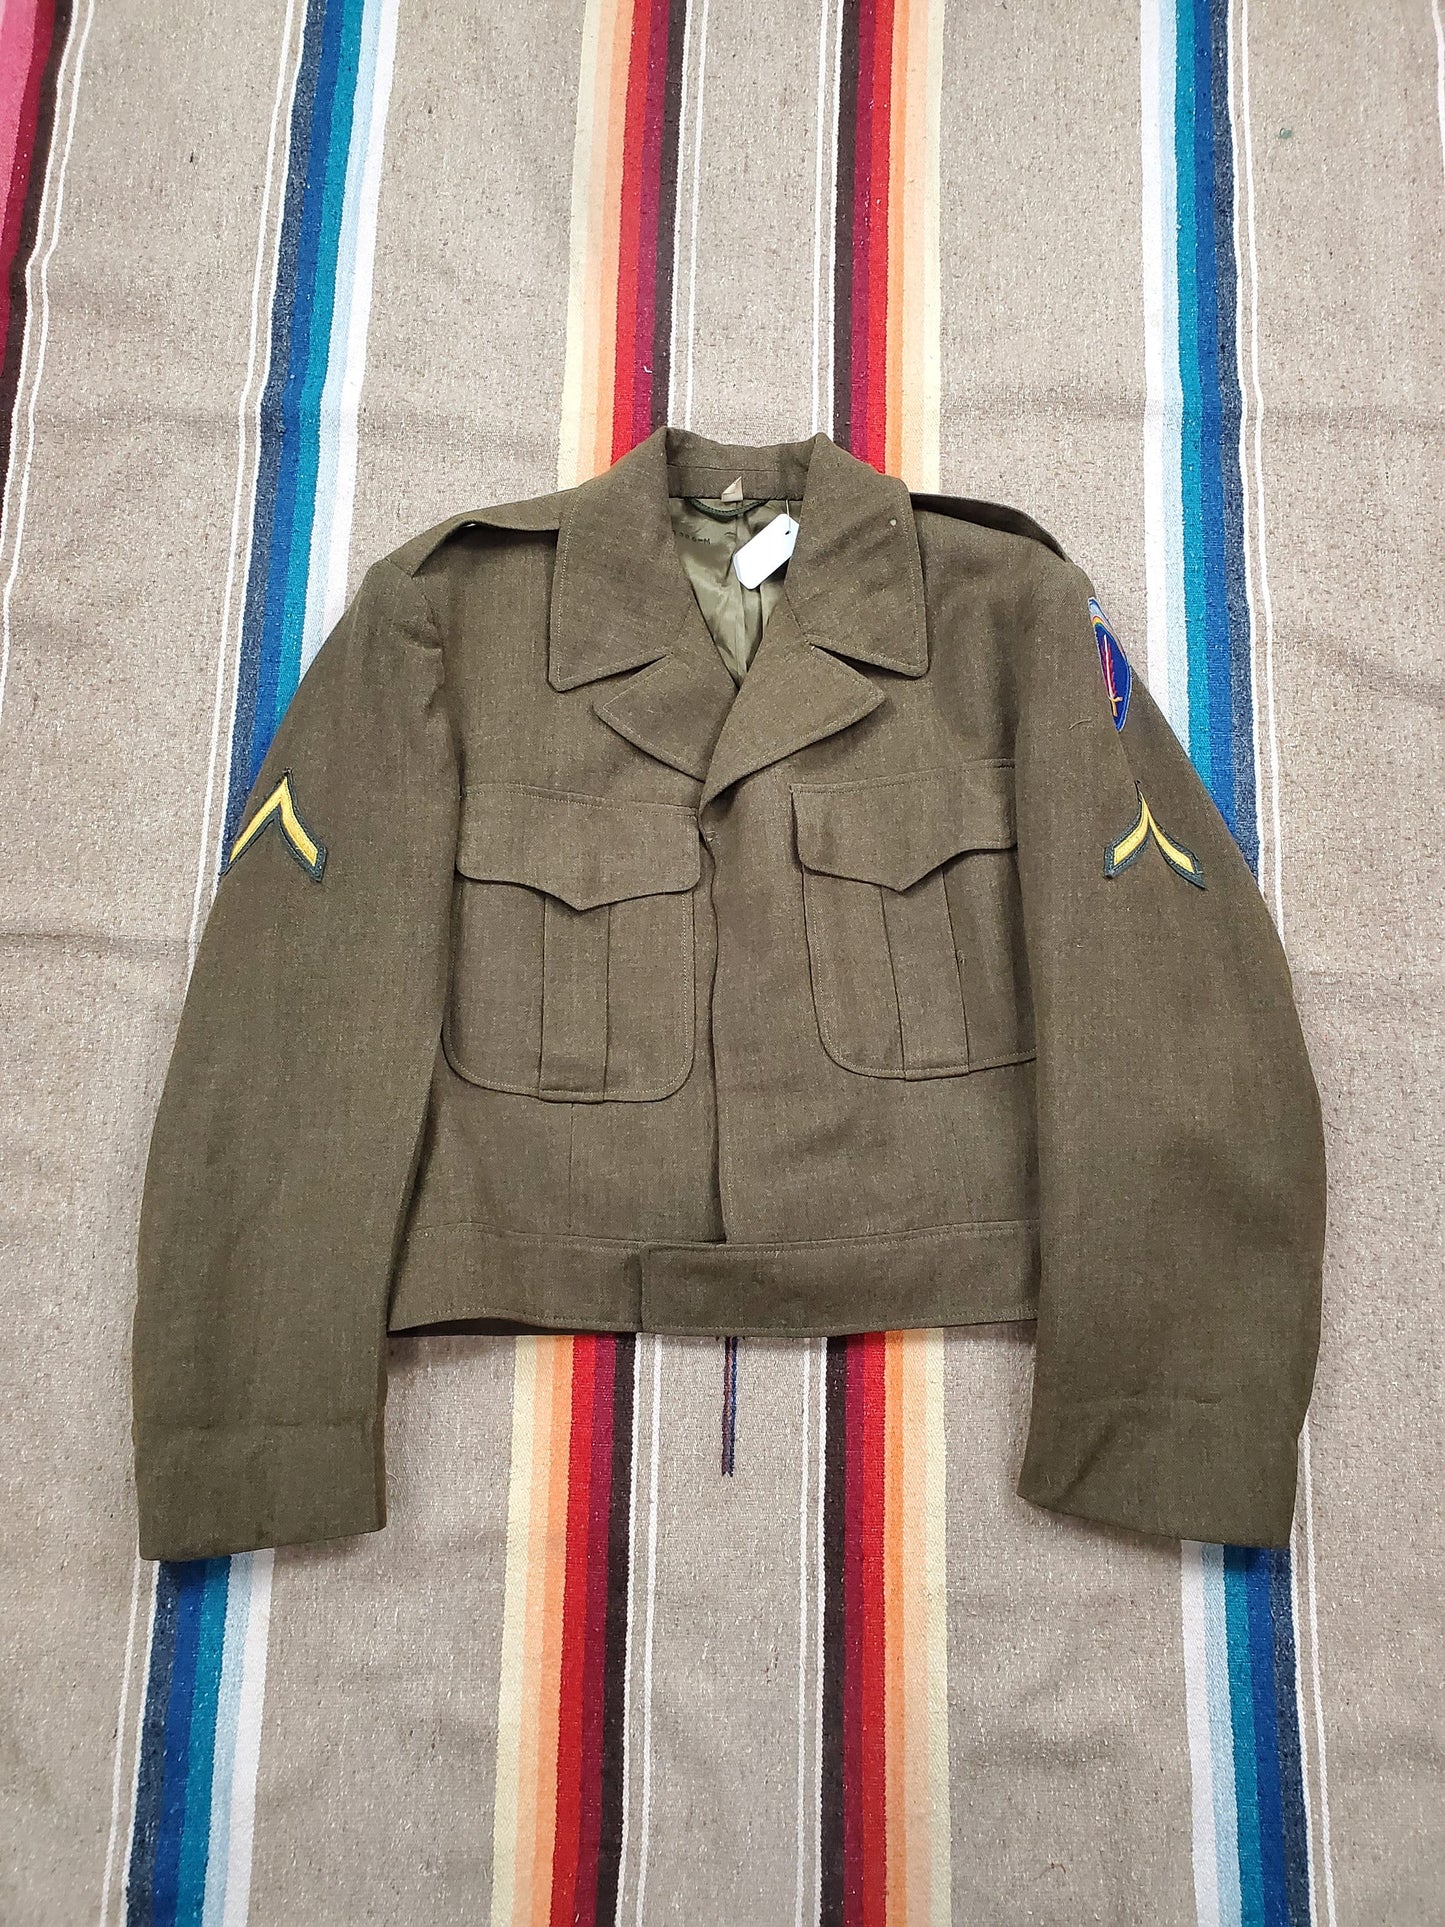 1950s 1952 US Army Wool Officers Jacket Eisenhower Jacket SHAEF Private Patches Made in USA Size xs/s